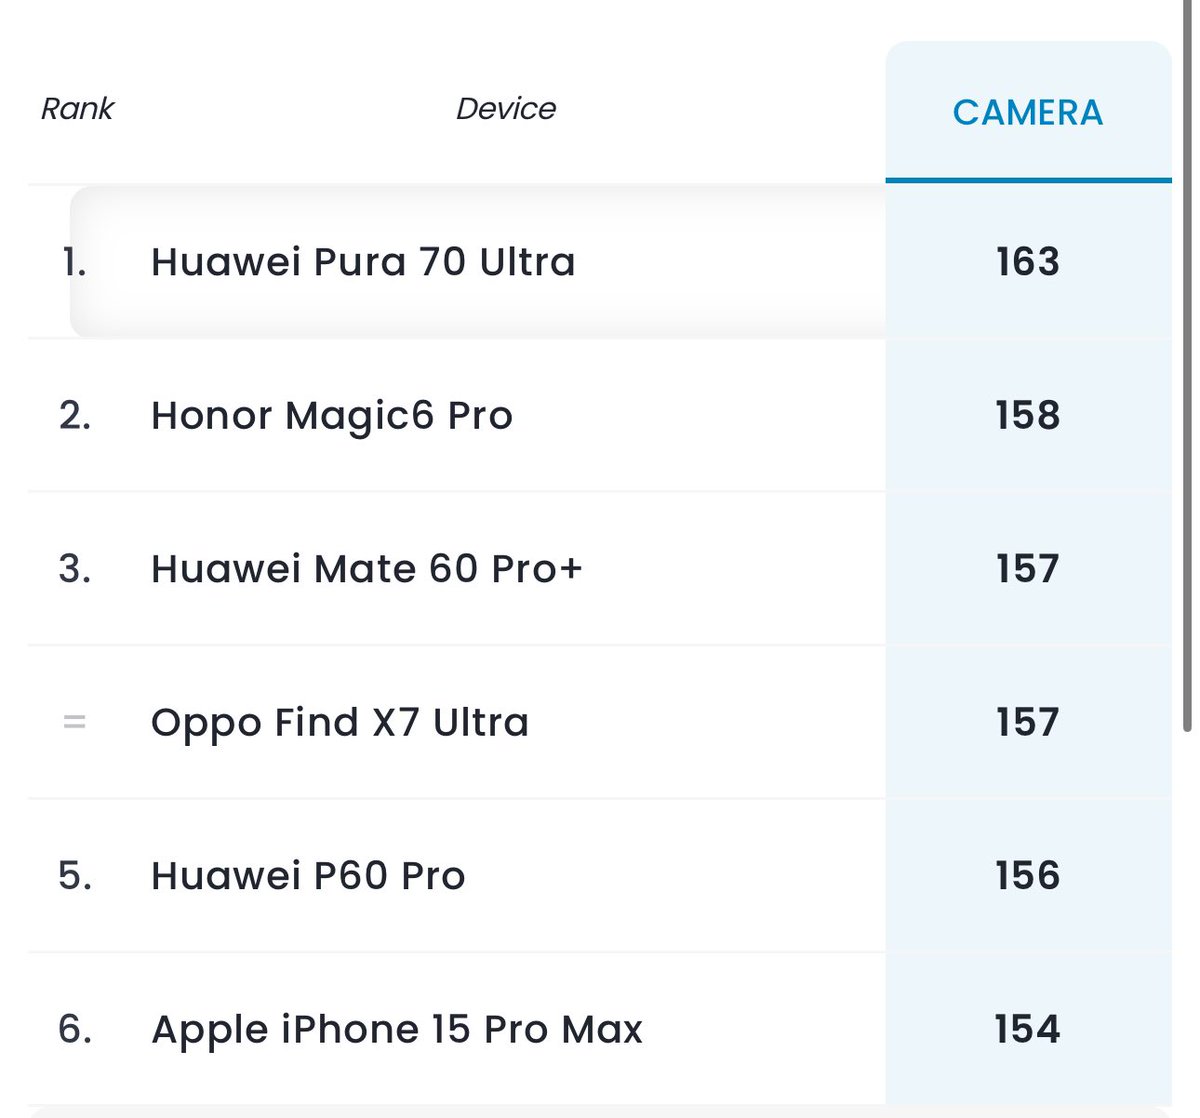 HUAWEI Pura 70 Ultra is #1 in DXOMARK’s camera ranking coming in at 163 points.

Second place is the Honor Magic 6 Pro at 158 points.

Credit: DXOMARK